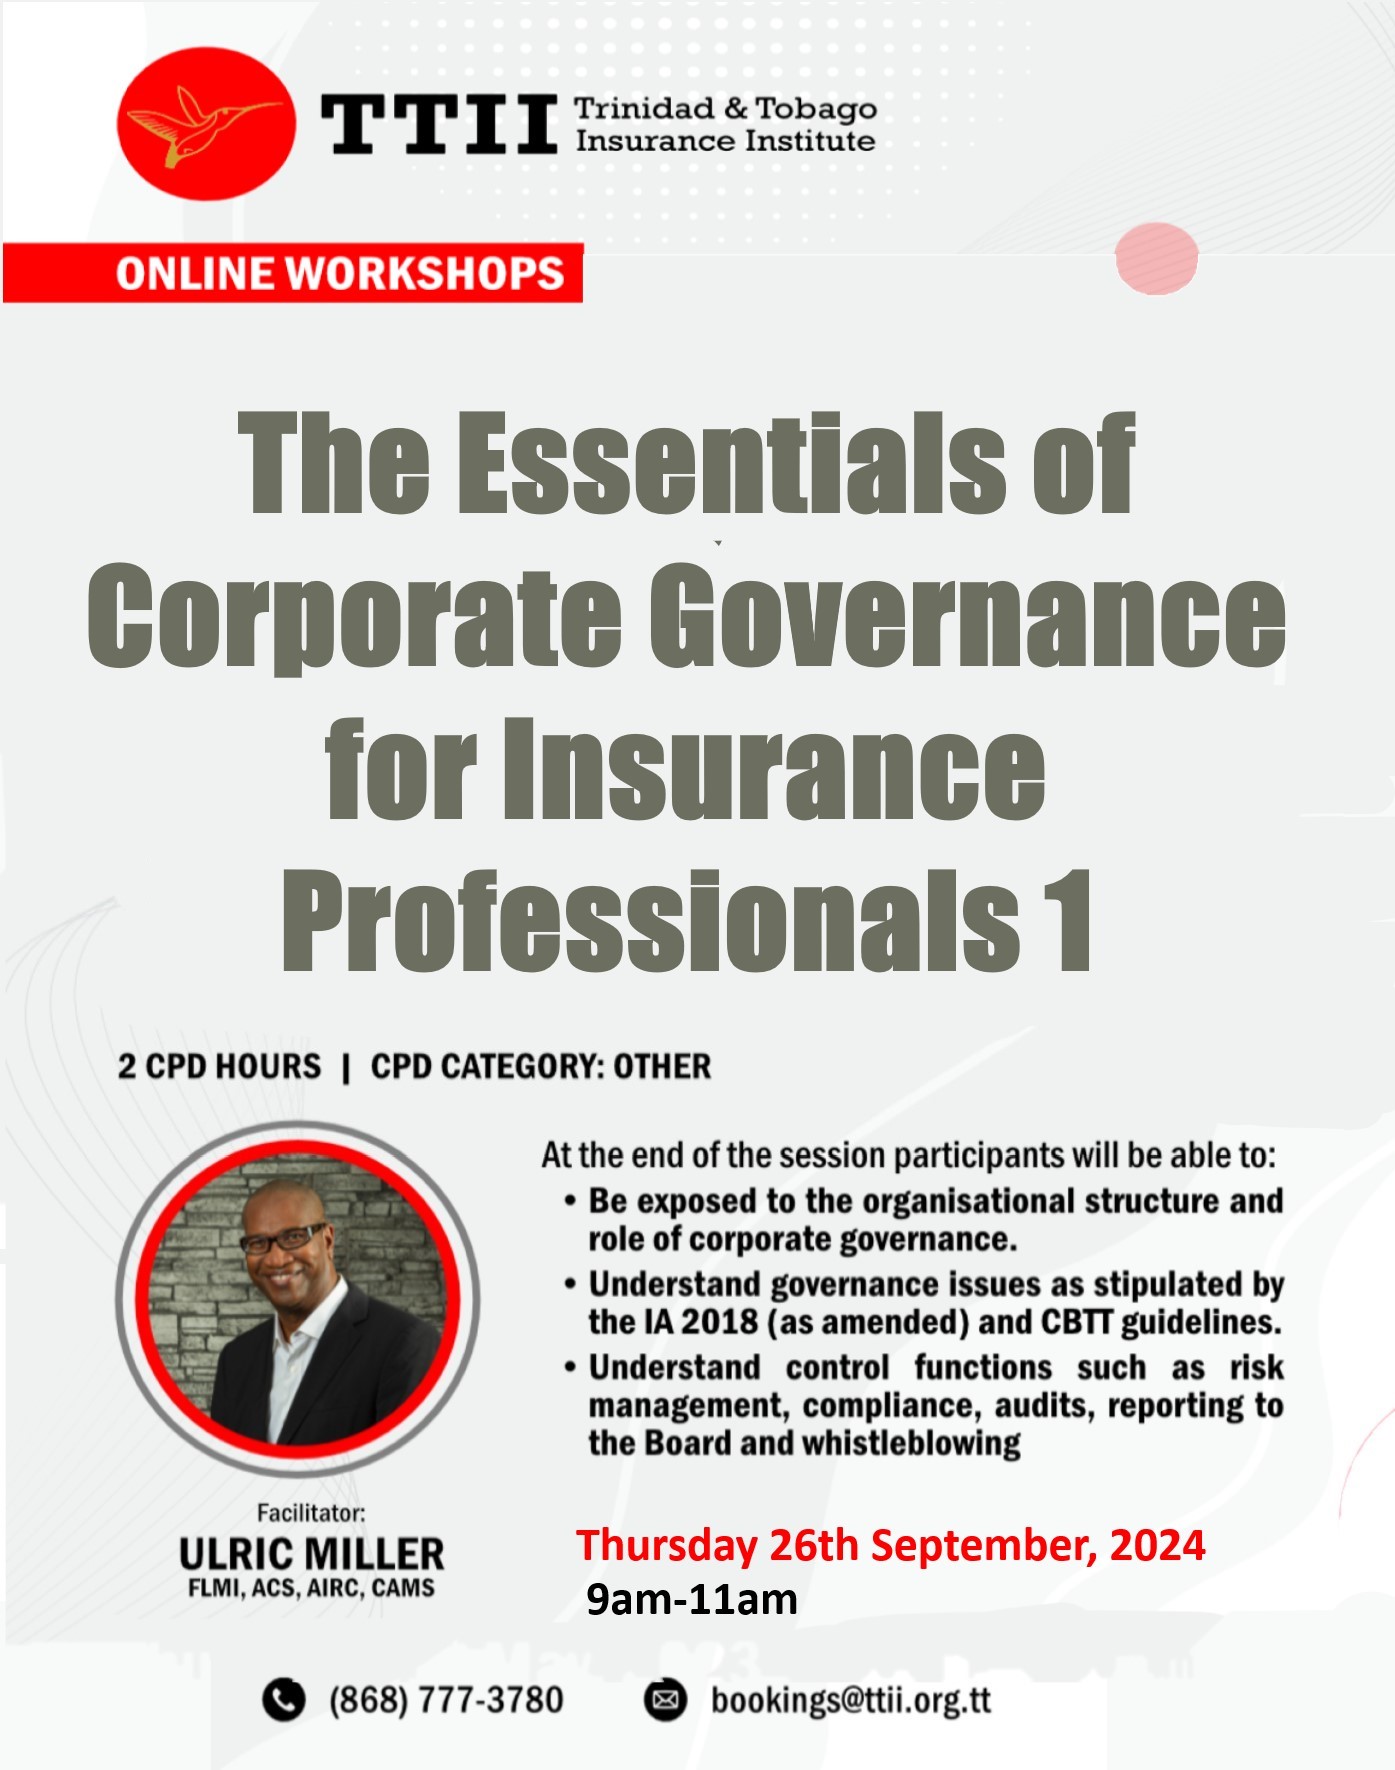 The Essentials of Corporate Governance for Insurance Professionals 1